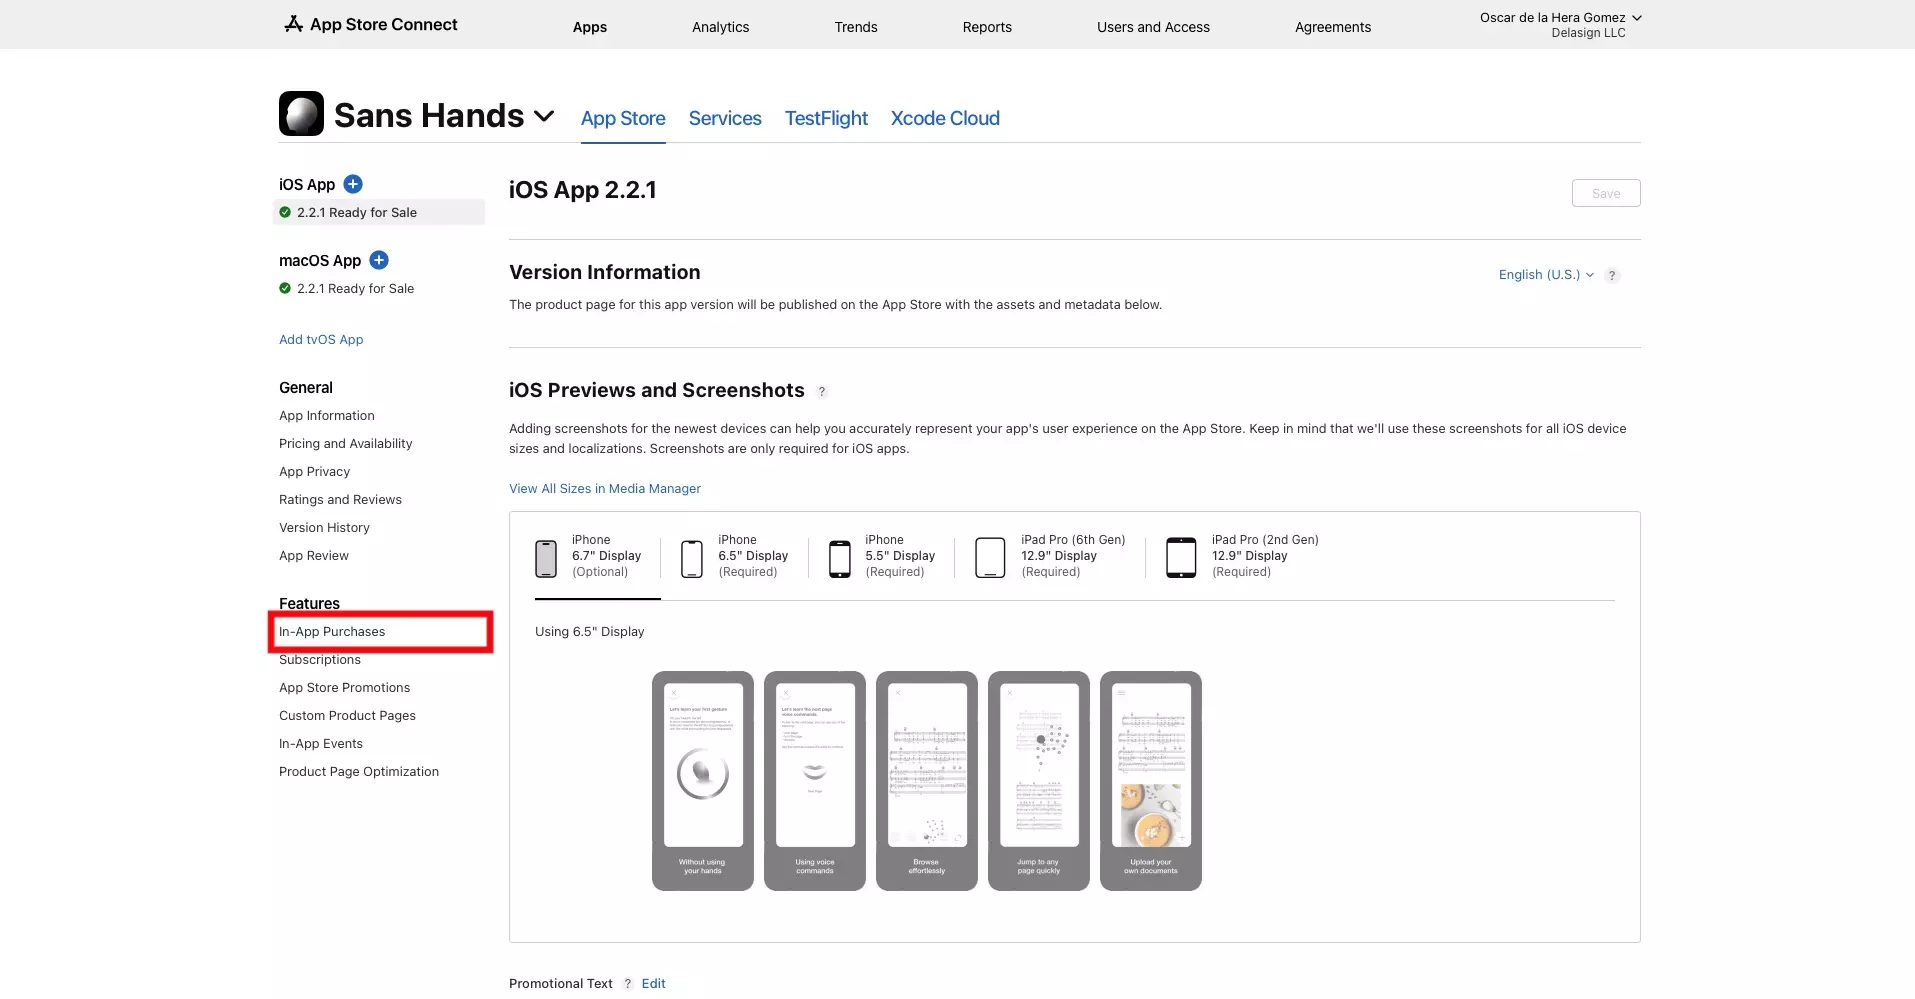 A screenshot of the Sans Hands iOS App page in App Store Connect. Highlighted on the left is the "In-App Purchases" menu tab, which is found under "Features" press it and move on to the next step.